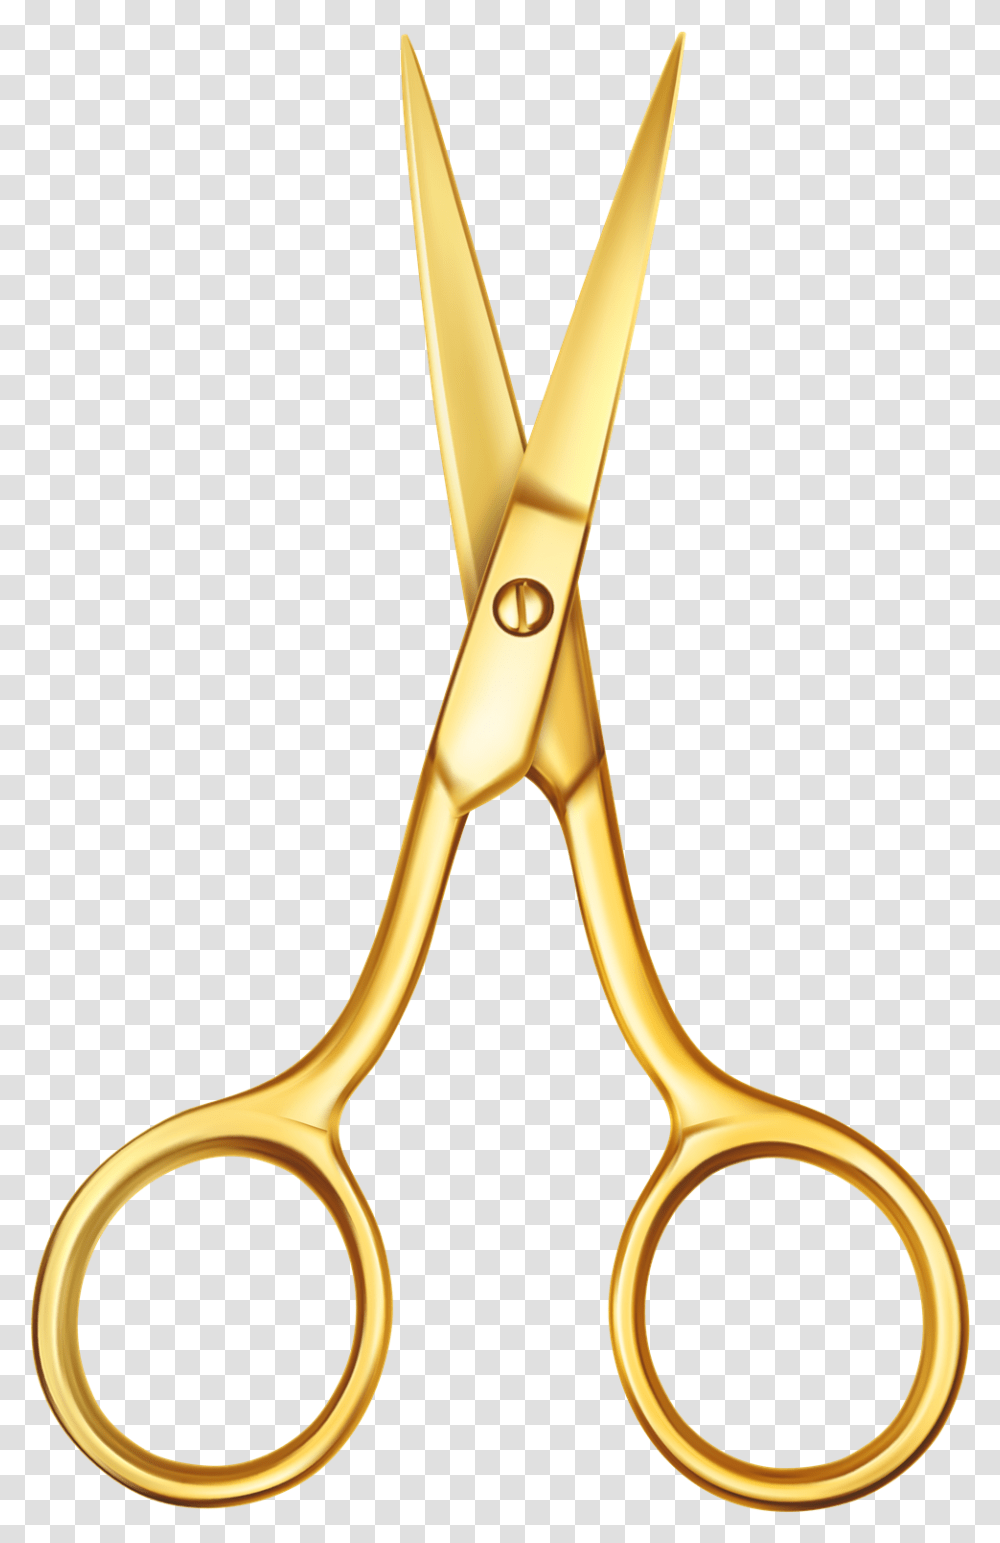 Images Free Download Background Gold Scissors, Weapon, Weaponry, Blade, Shears Transparent Png